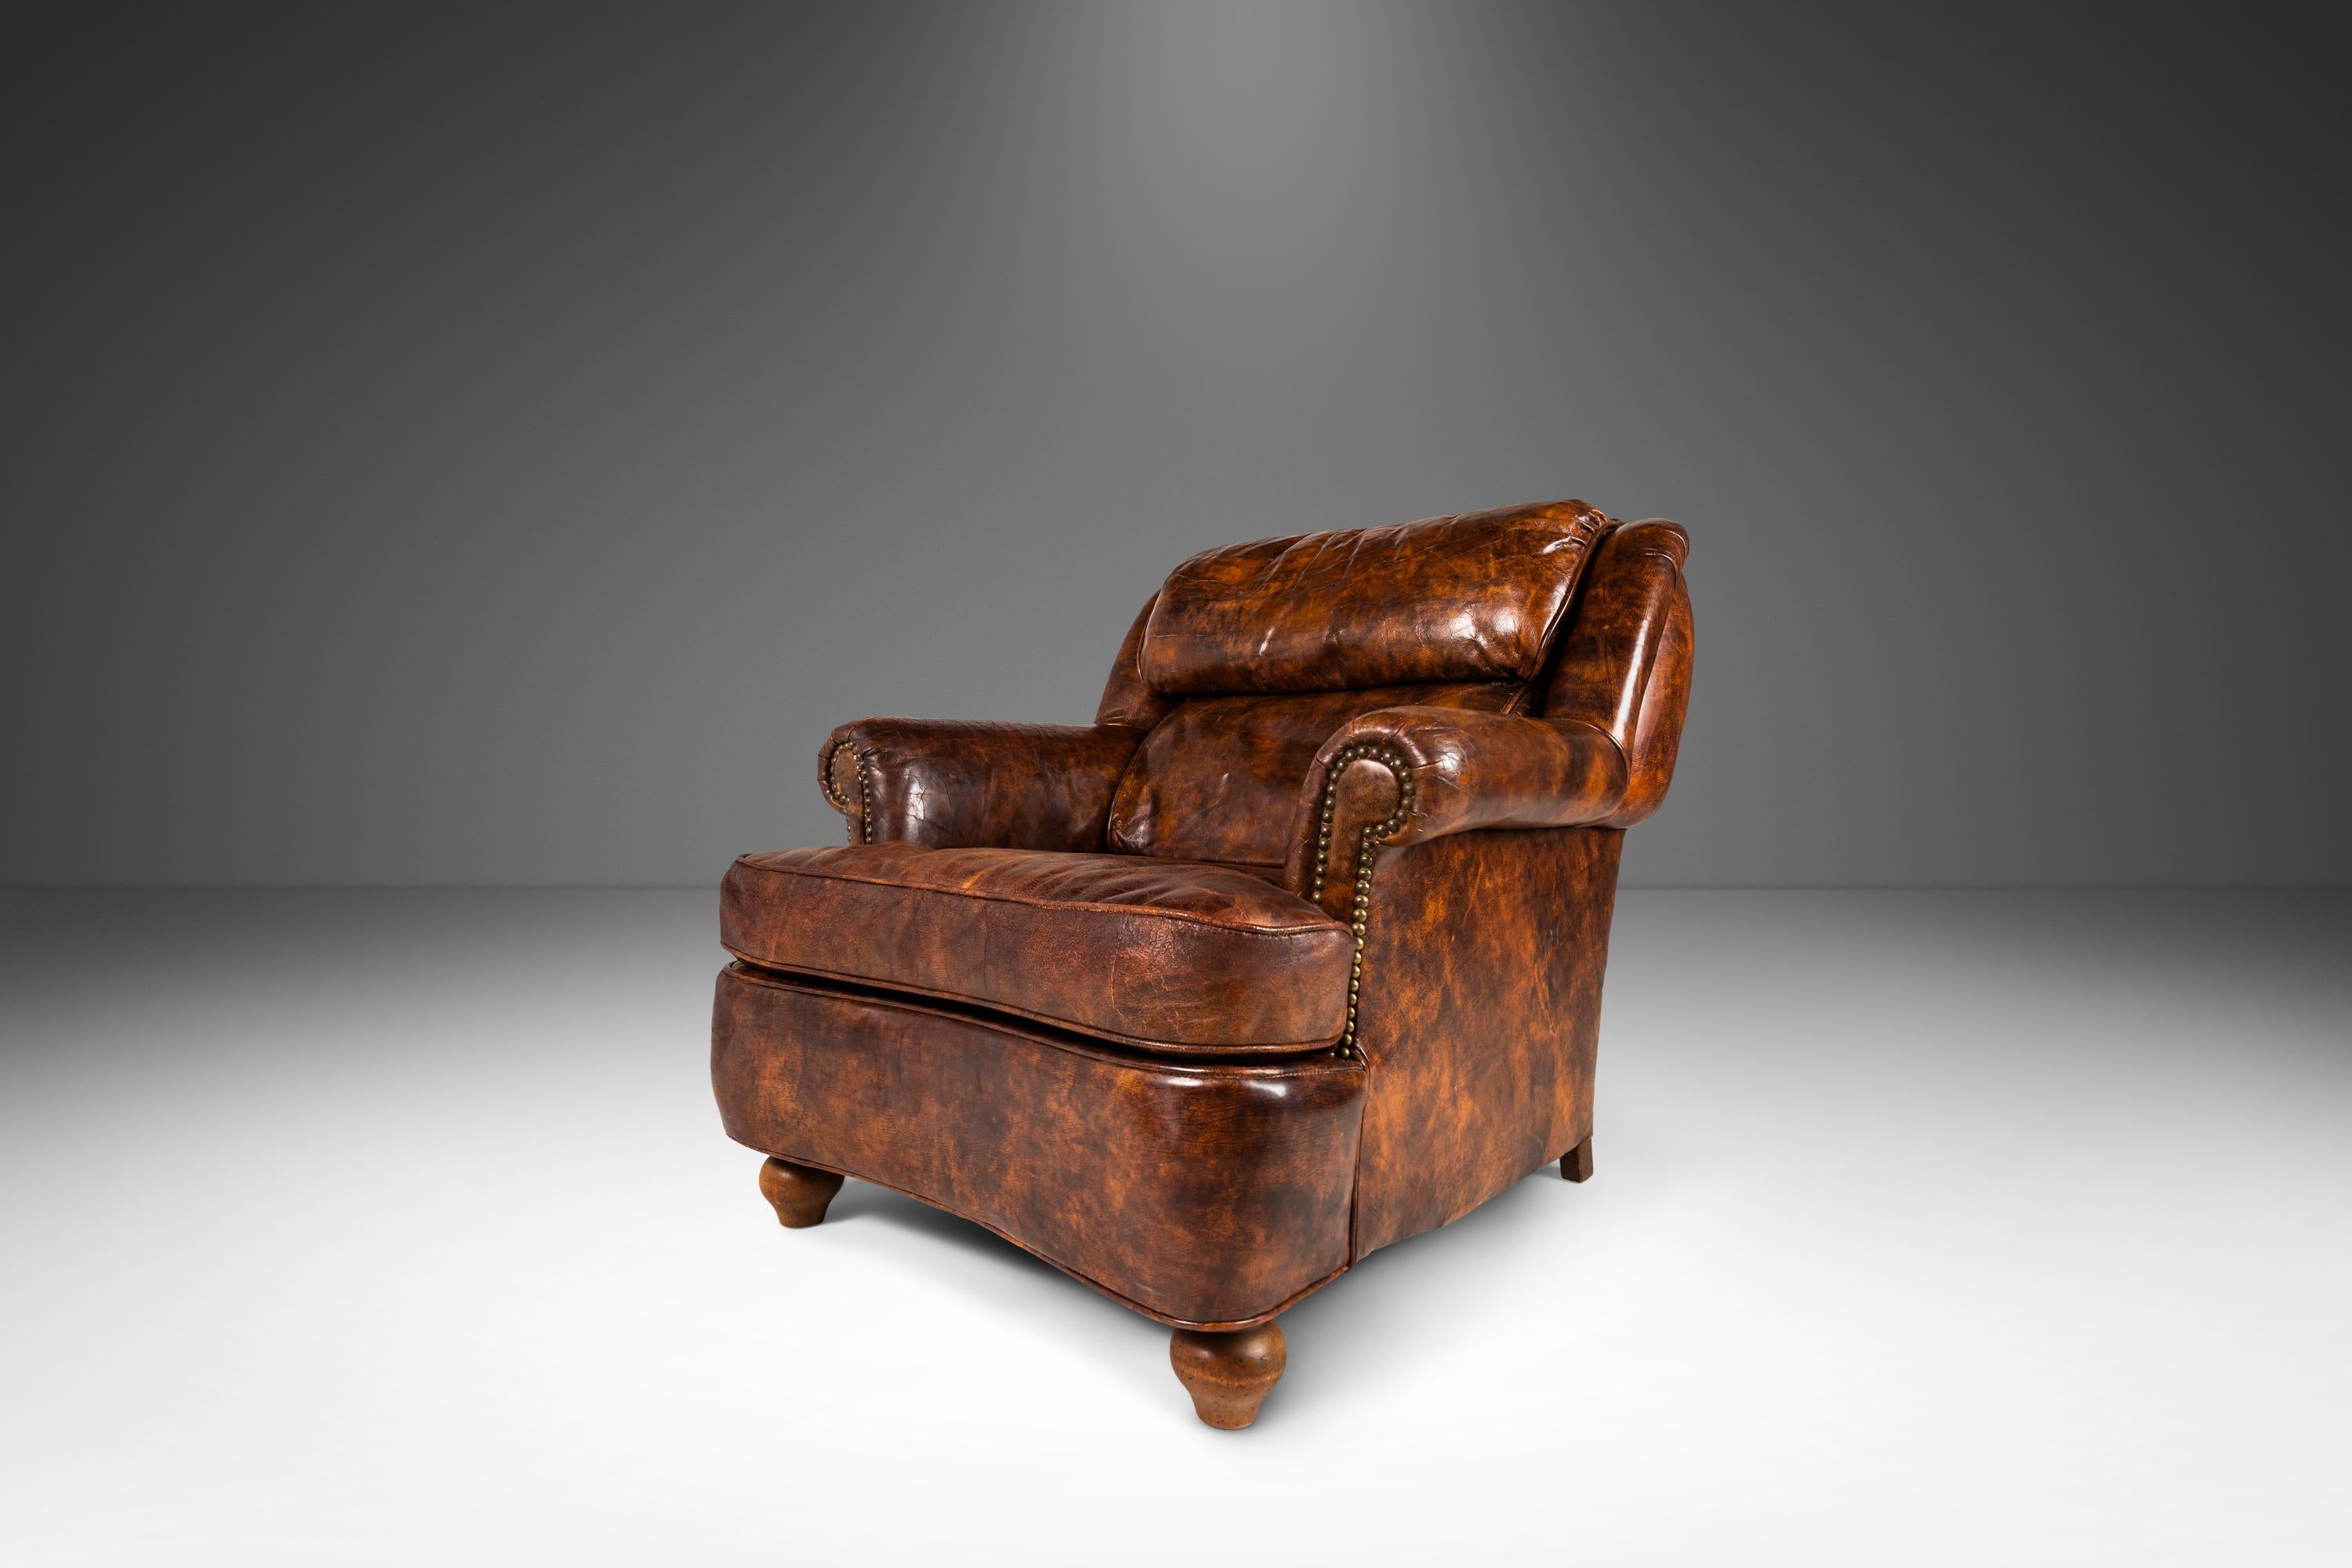 Patinaed French Club Chair Cigar Chair & Ottoman in Distressed Leather c. 1940s For Sale 1